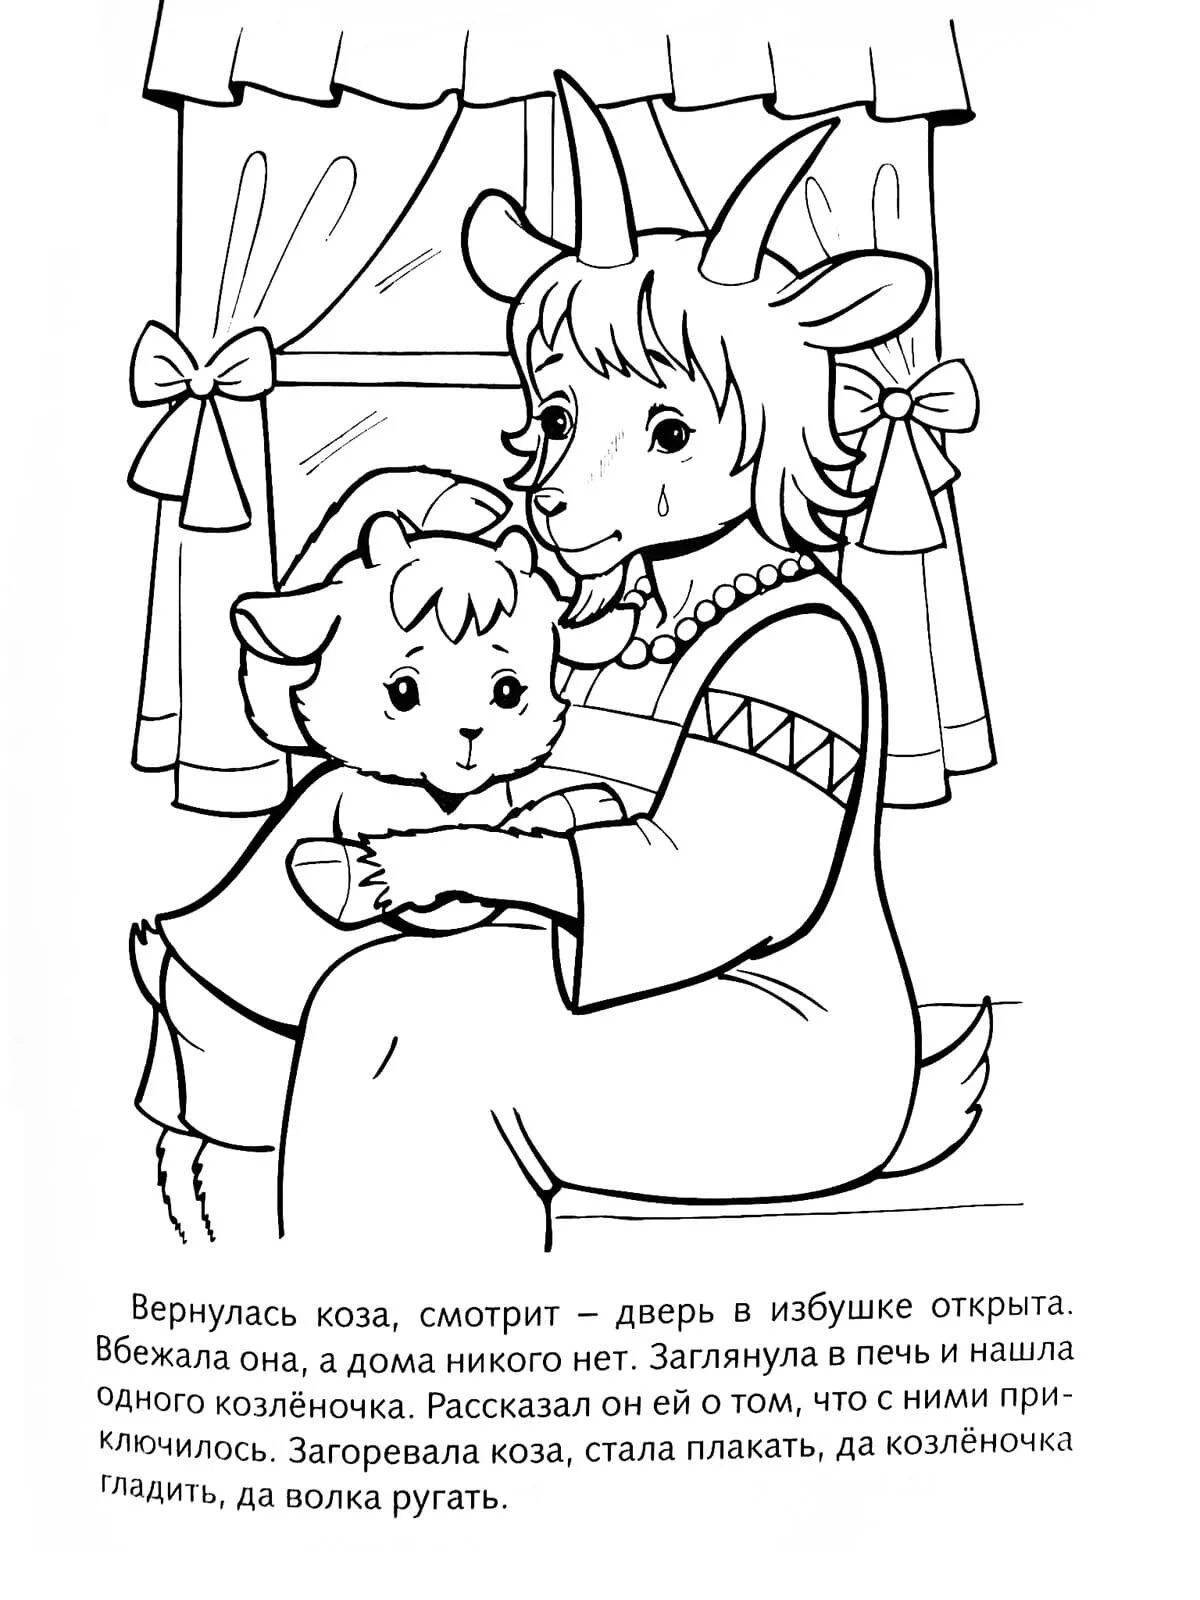 Adorable wolf and seven children coloring pages